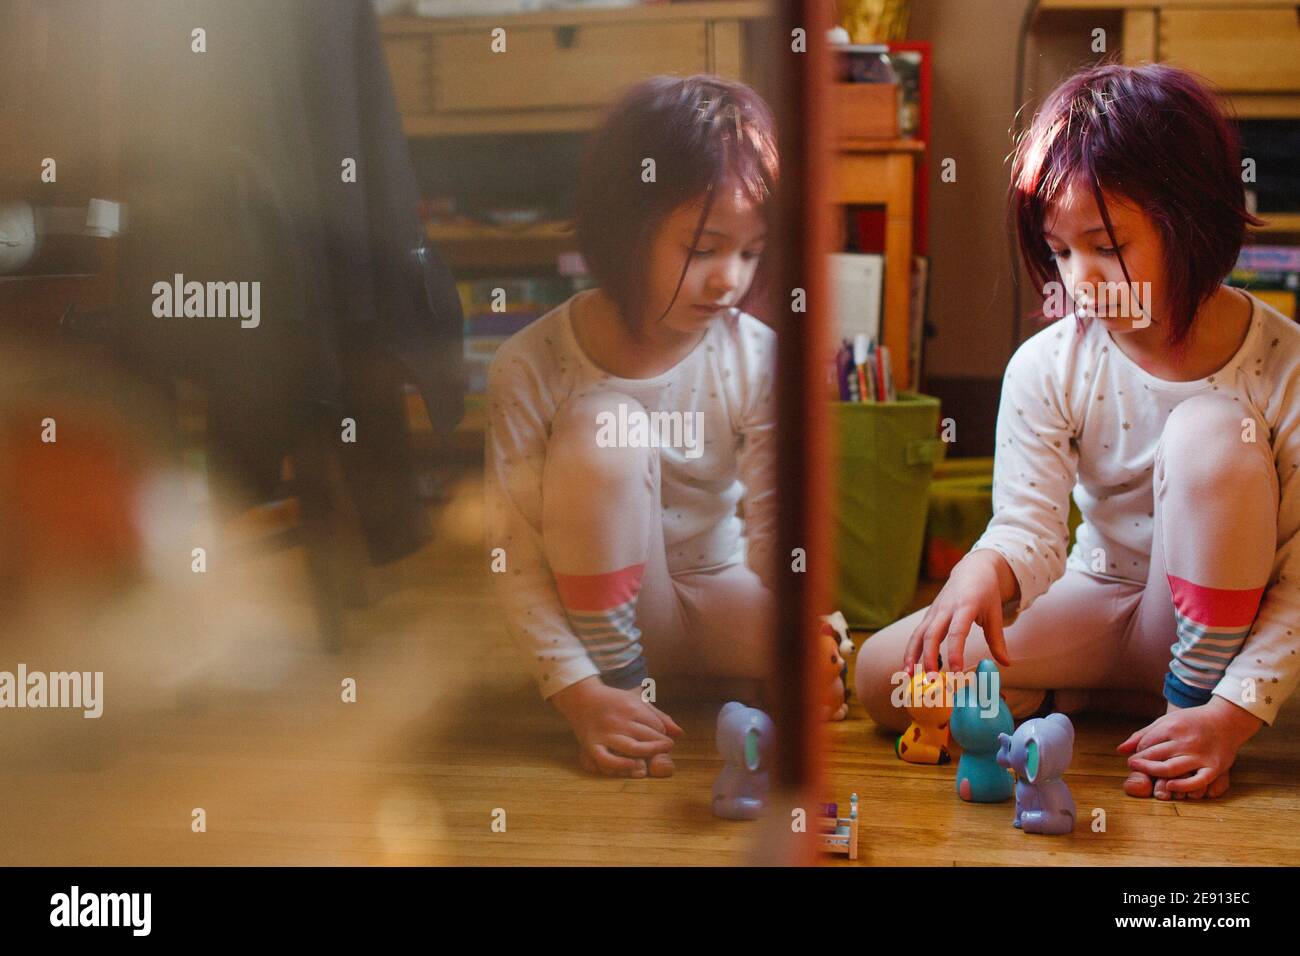 A small child sits reflected in glass playing with toys on wood floor Stock Photo